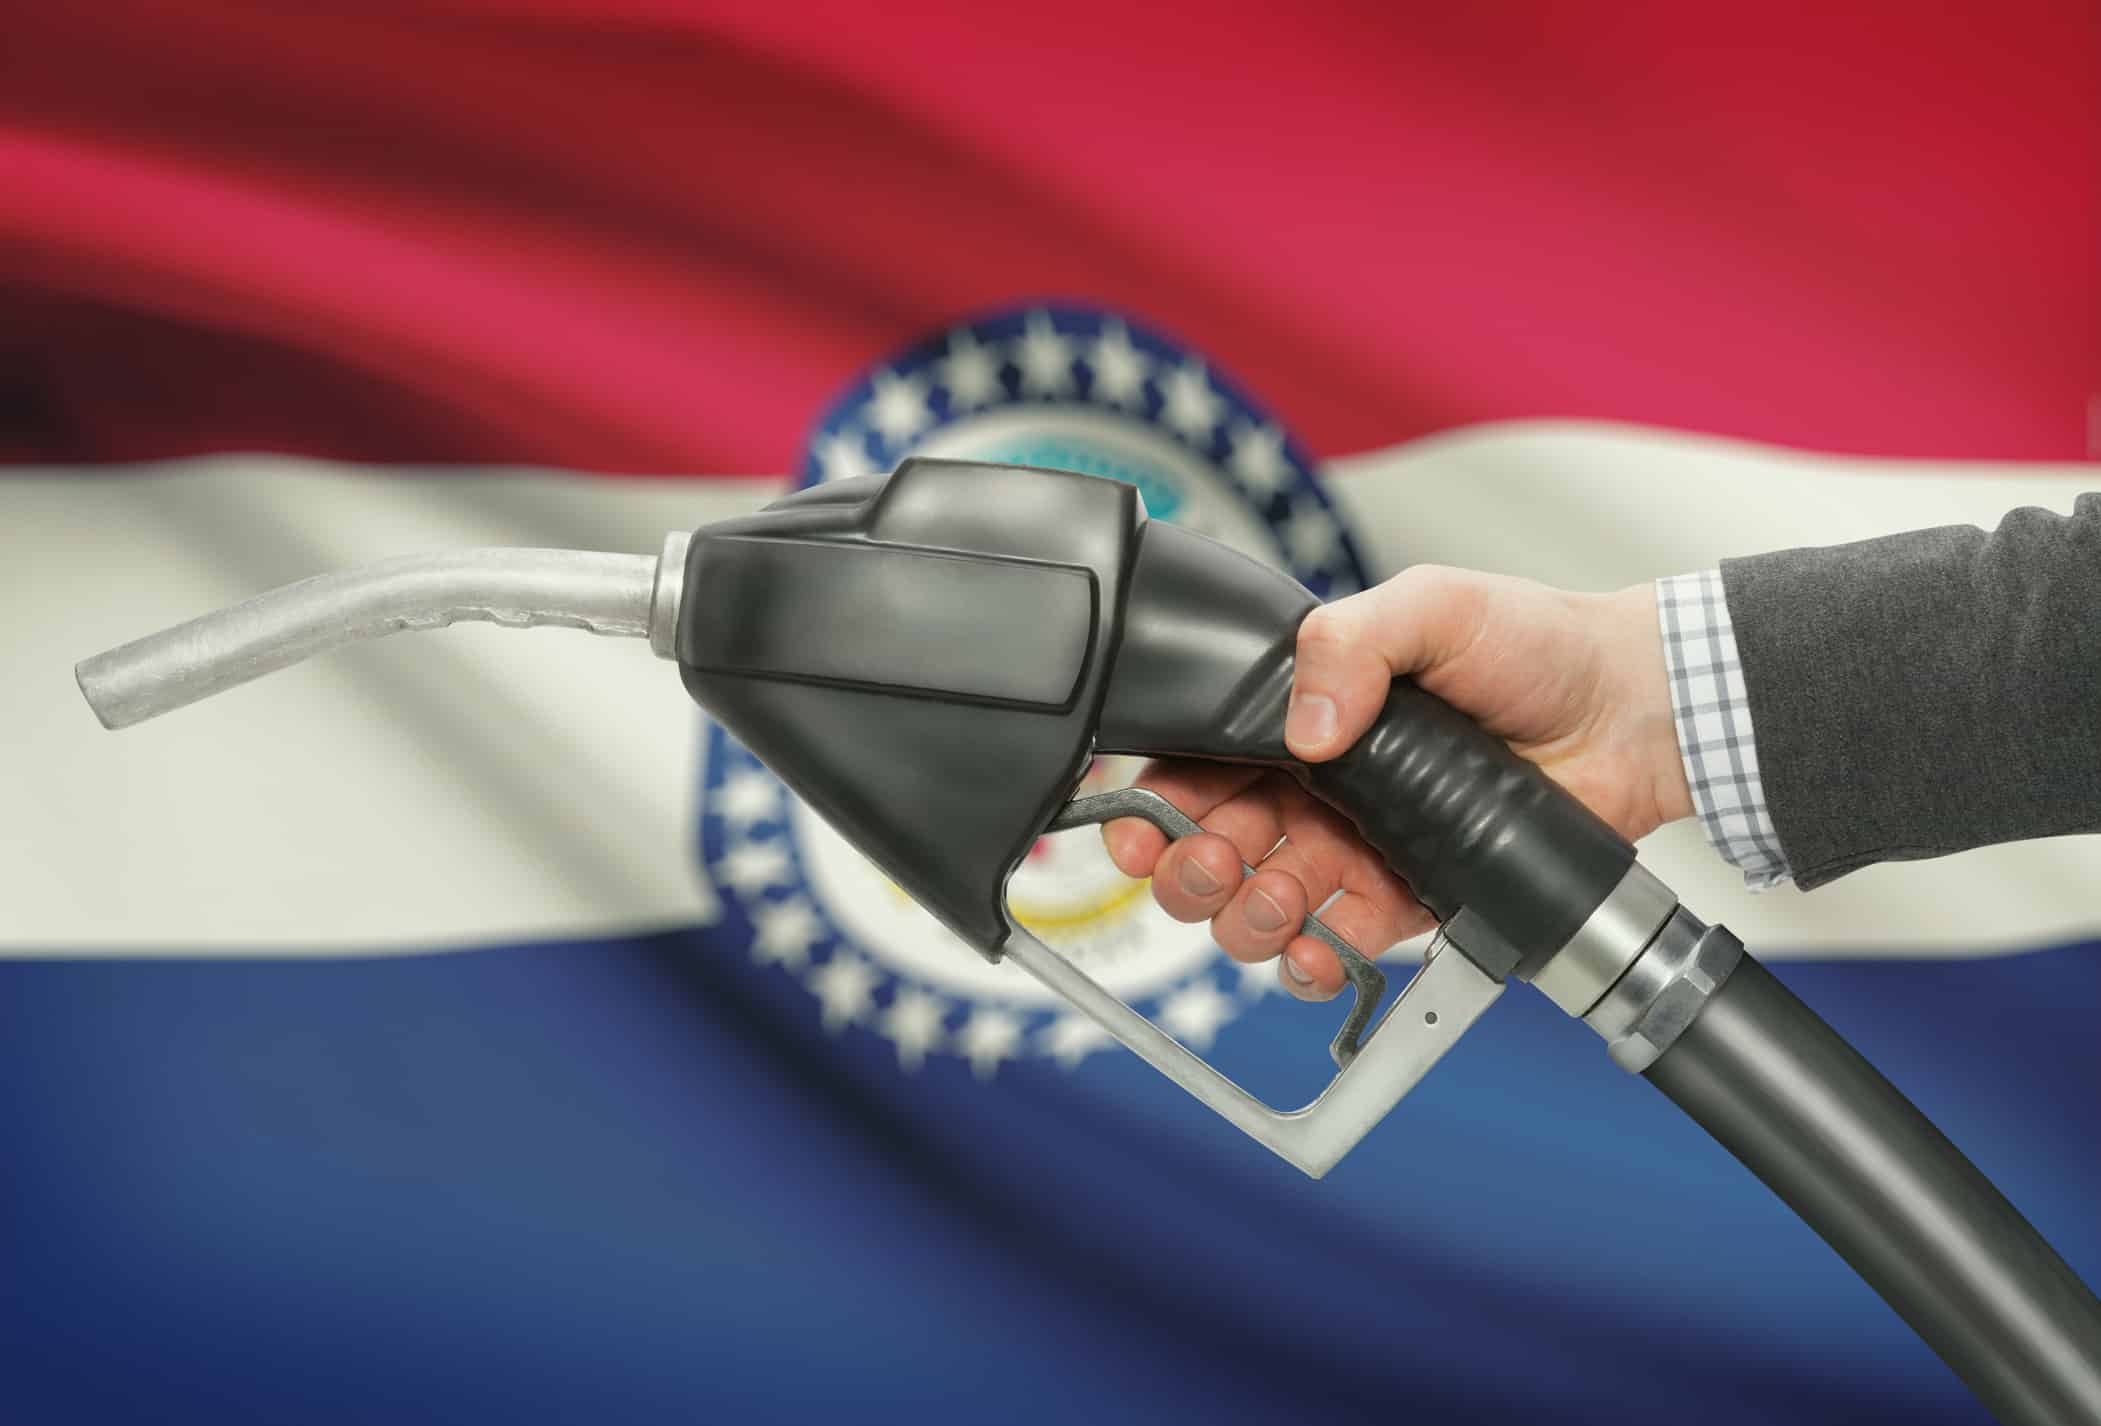 Fuel pump nozzle in hand with USA states flags on background - Missouri